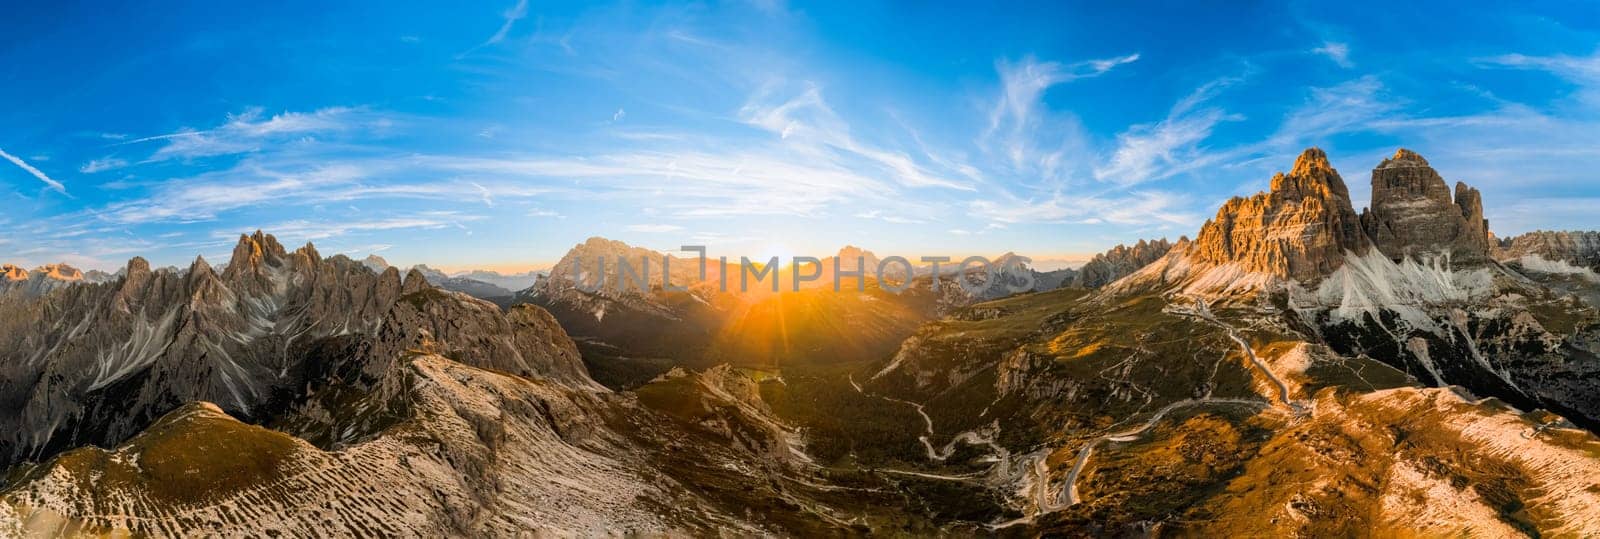 Rocky mountains rise above deep canyons. Mountain landscapes of primeval nature under blue sky. Tre Cime di Lavaredo at sunset aerial view